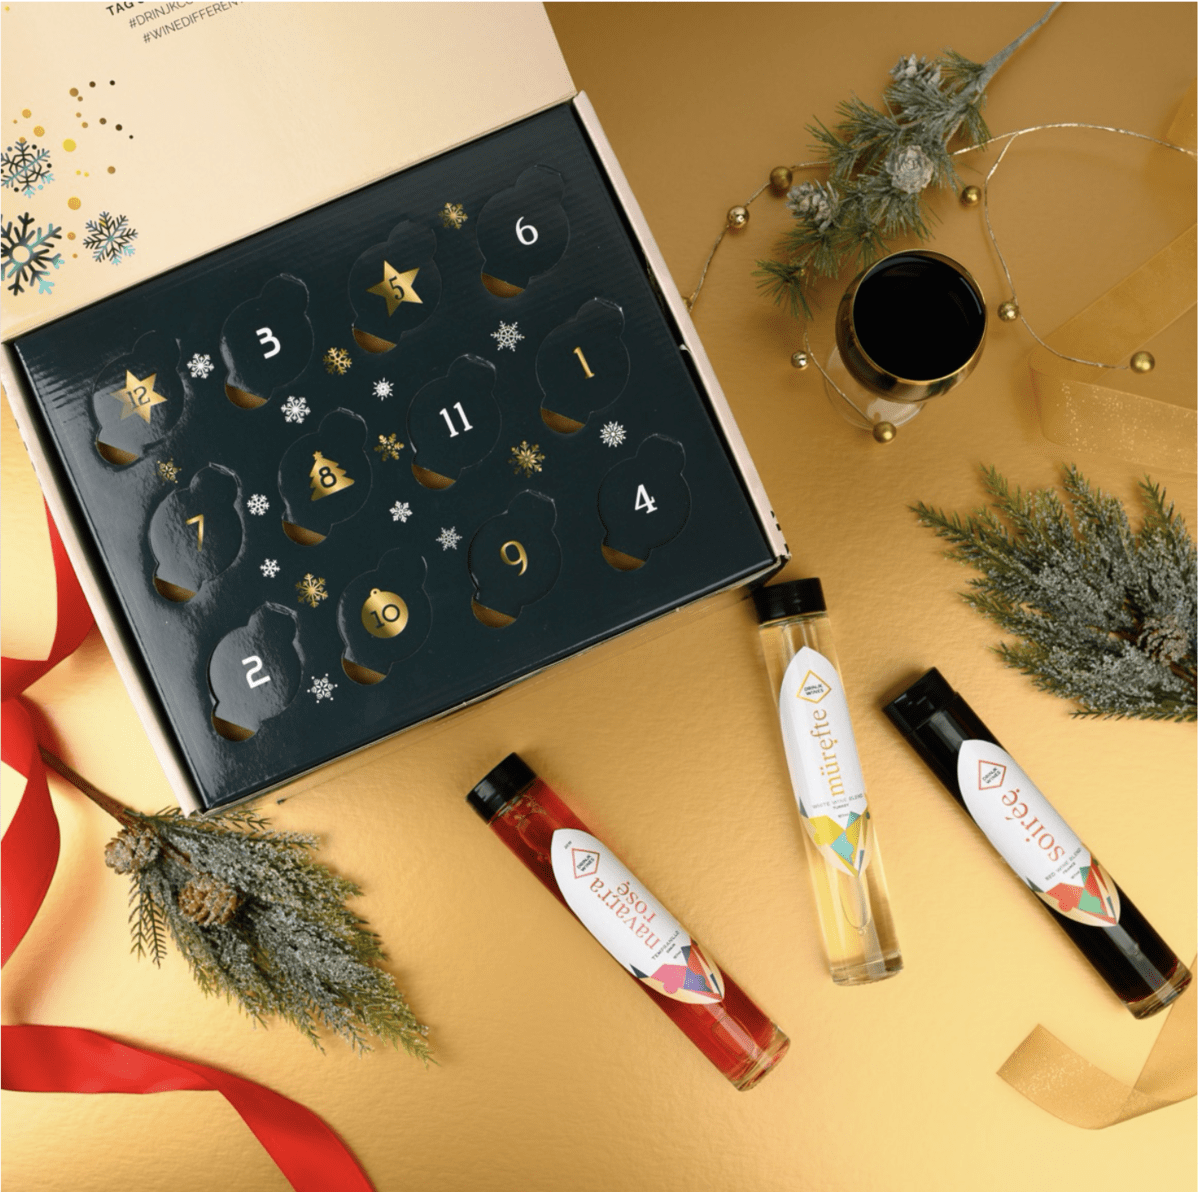 Read more about the article Drinjk’s Wine Advent Calendar – Now Available for Pre-Order!